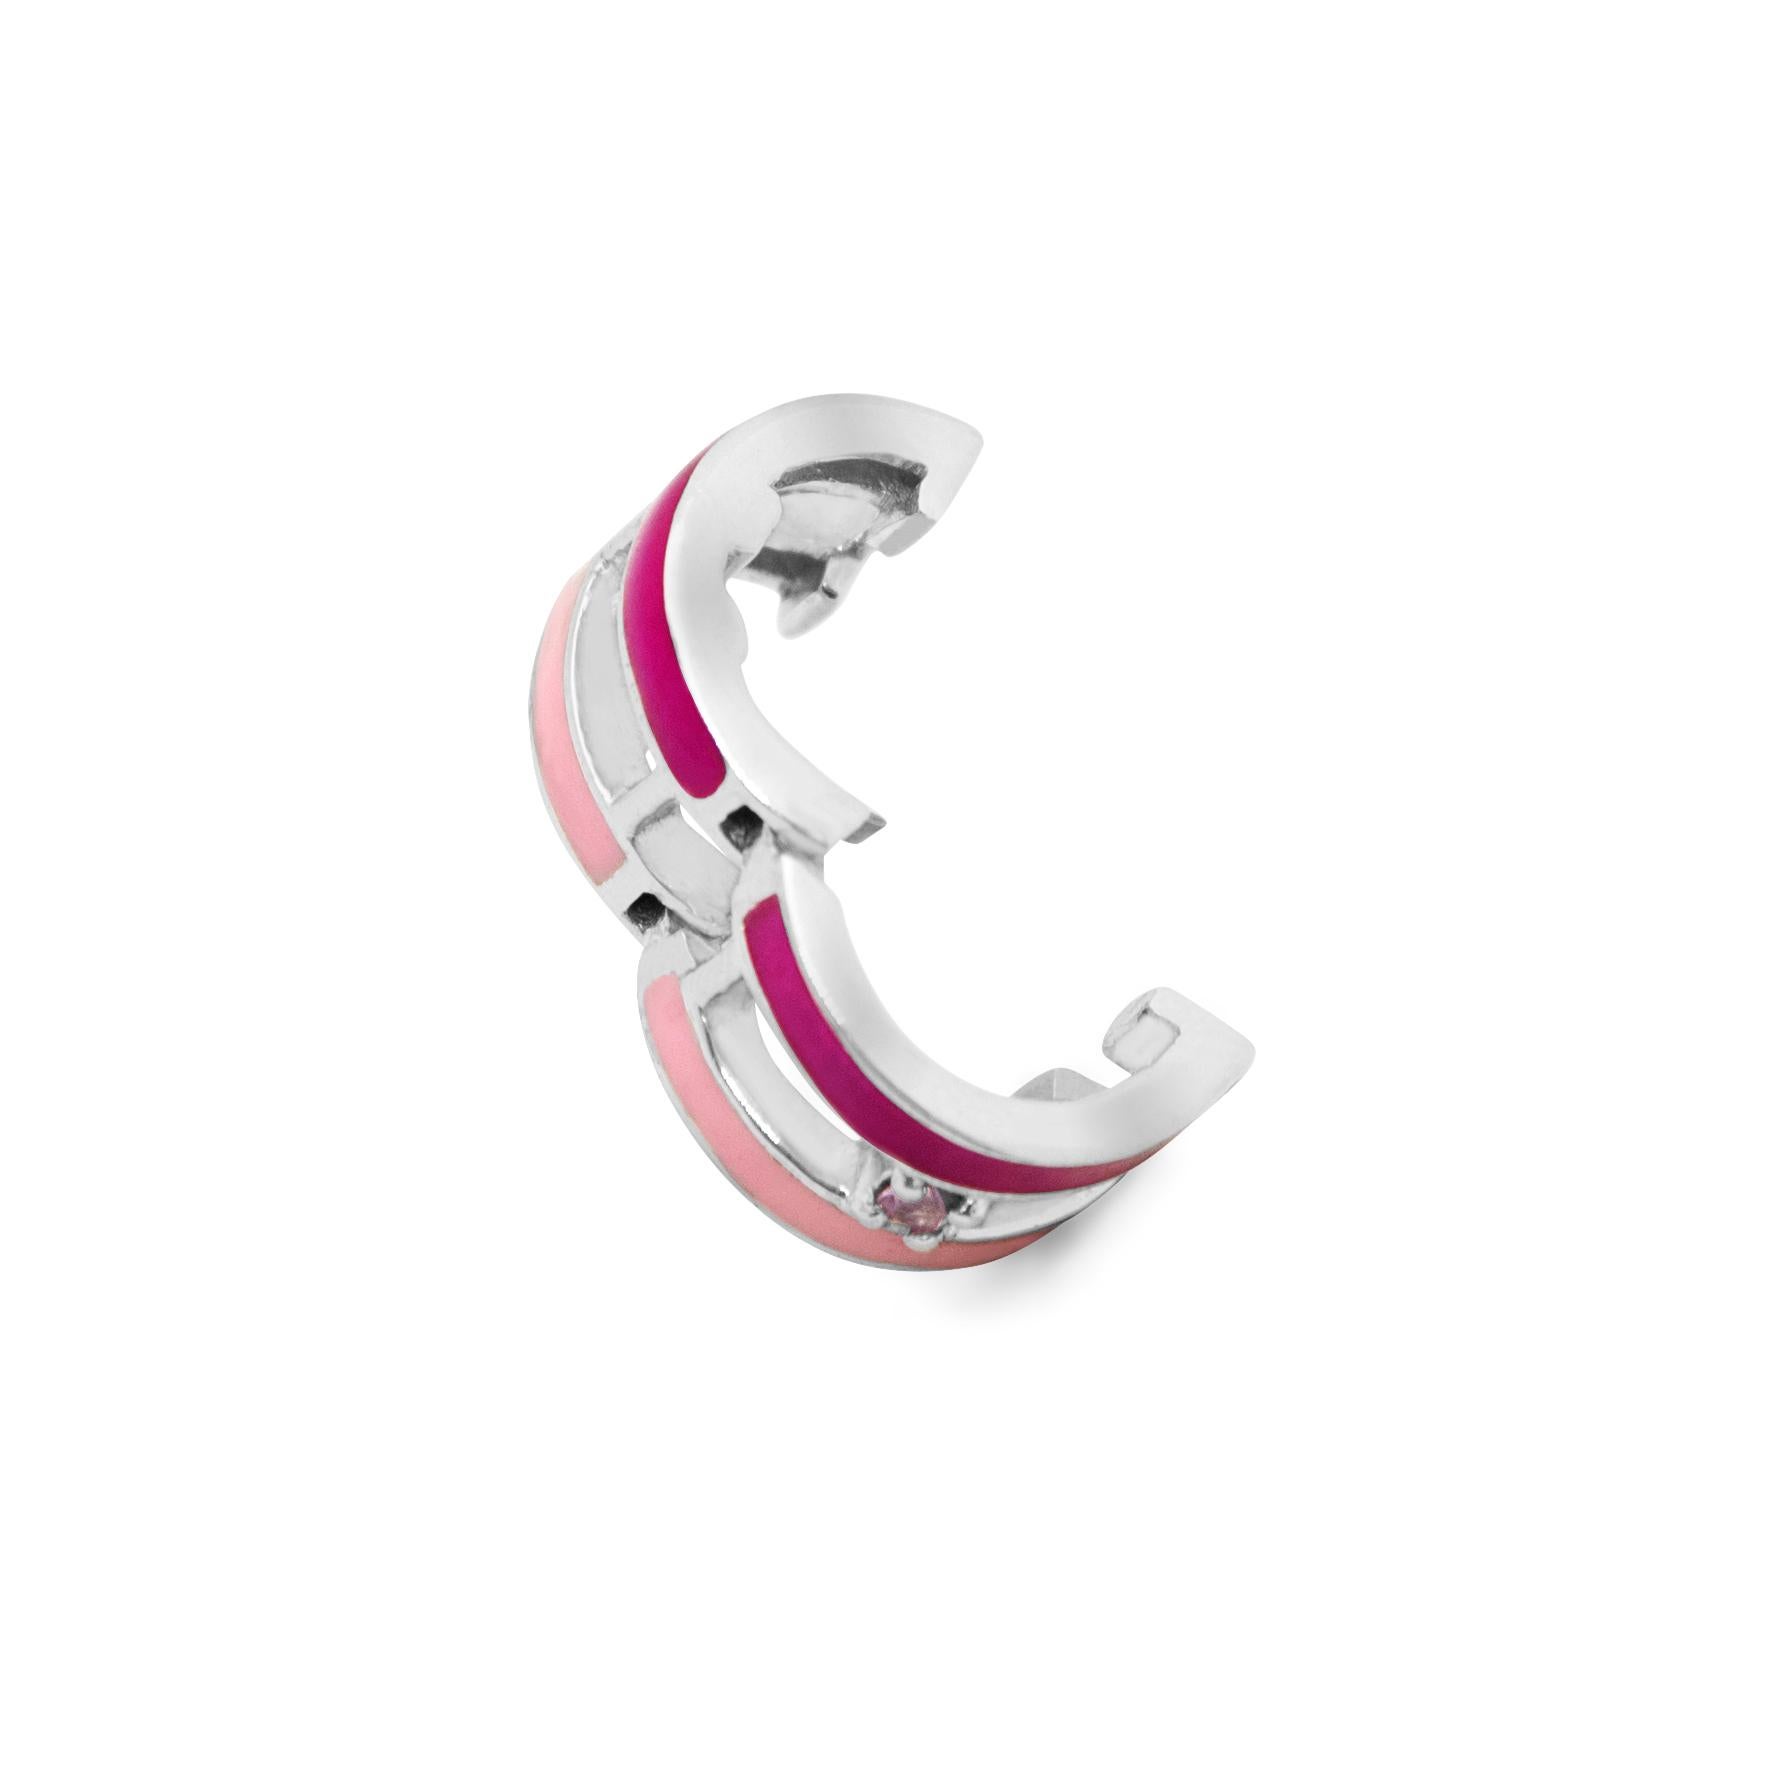 The Striped Ear Cuff punky nature can inject a subversive, rebellious spirit into just any outfit. It comes as a single piece so that you can mix and match with others in different colours. Designed with a clever opening mechanism.
The design is